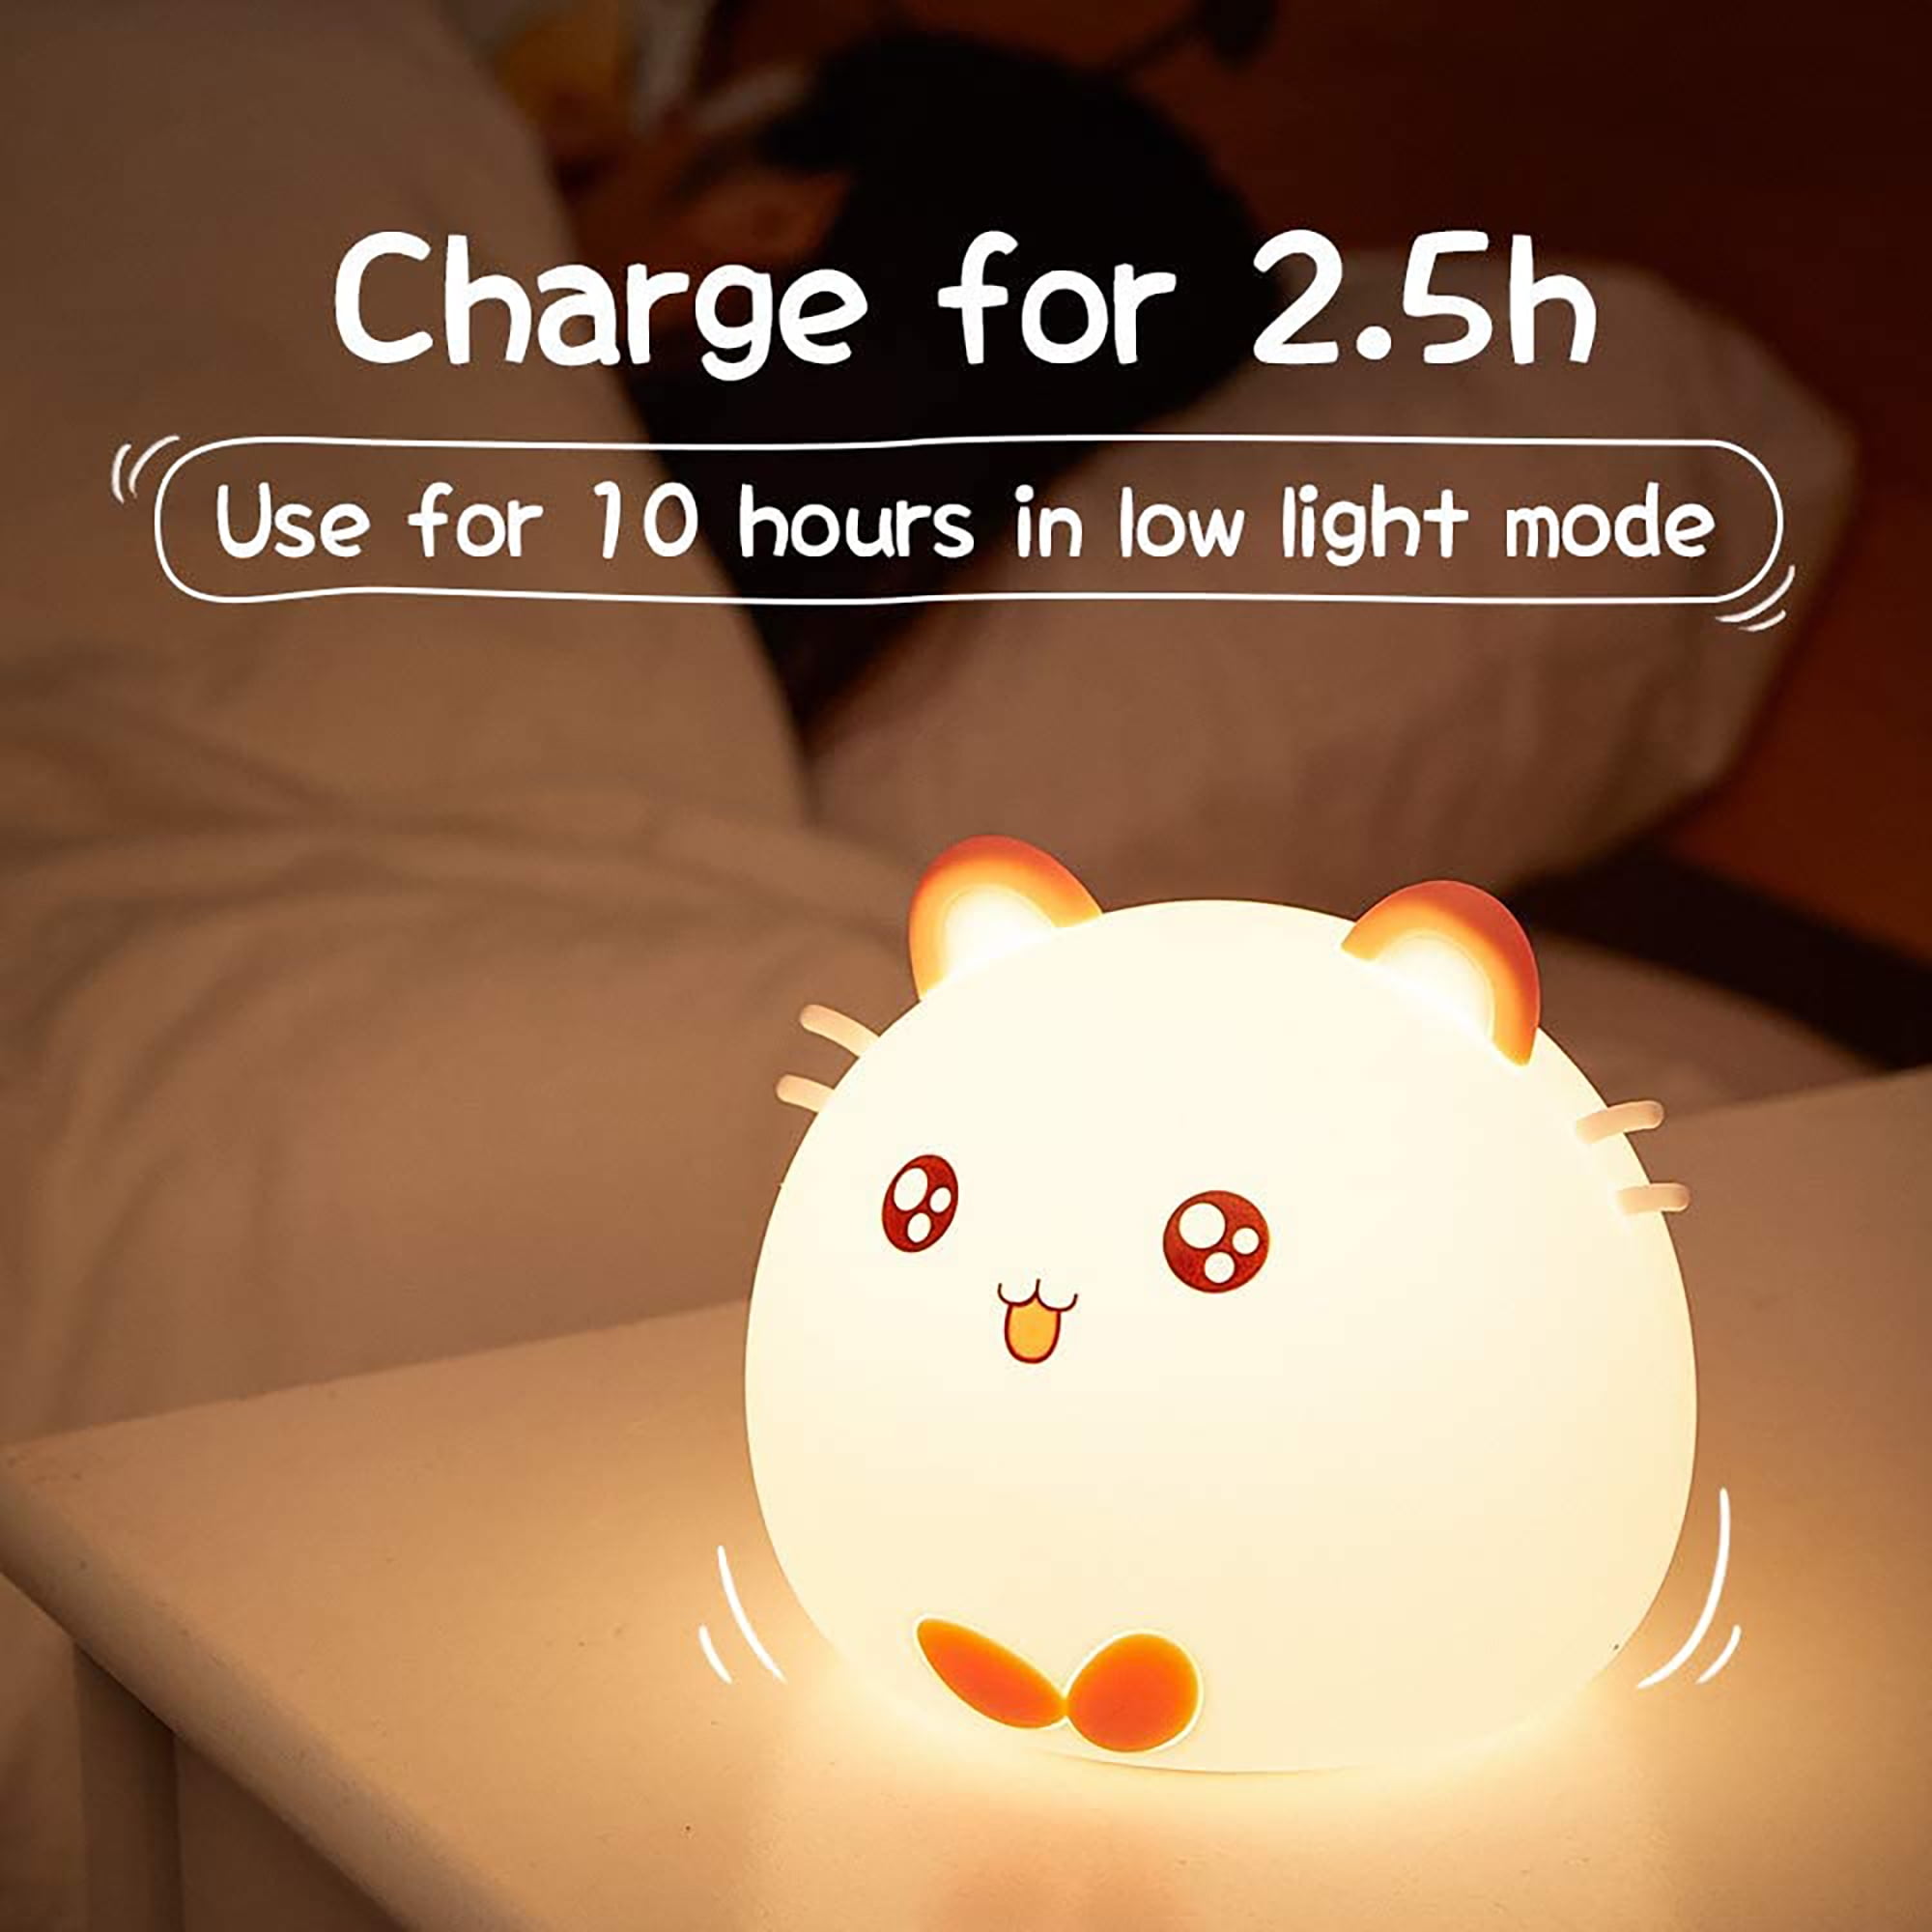 Cute Kitty Night Light,Valentine Gifts For Kids,Squishy Cat Nightlight For Toddlers,Baby,Teen Girl,Color Changing Animal Silicone Lights,Portable And Rechargeable Light Up Lamp,Kawaii Room Decor Stuff 